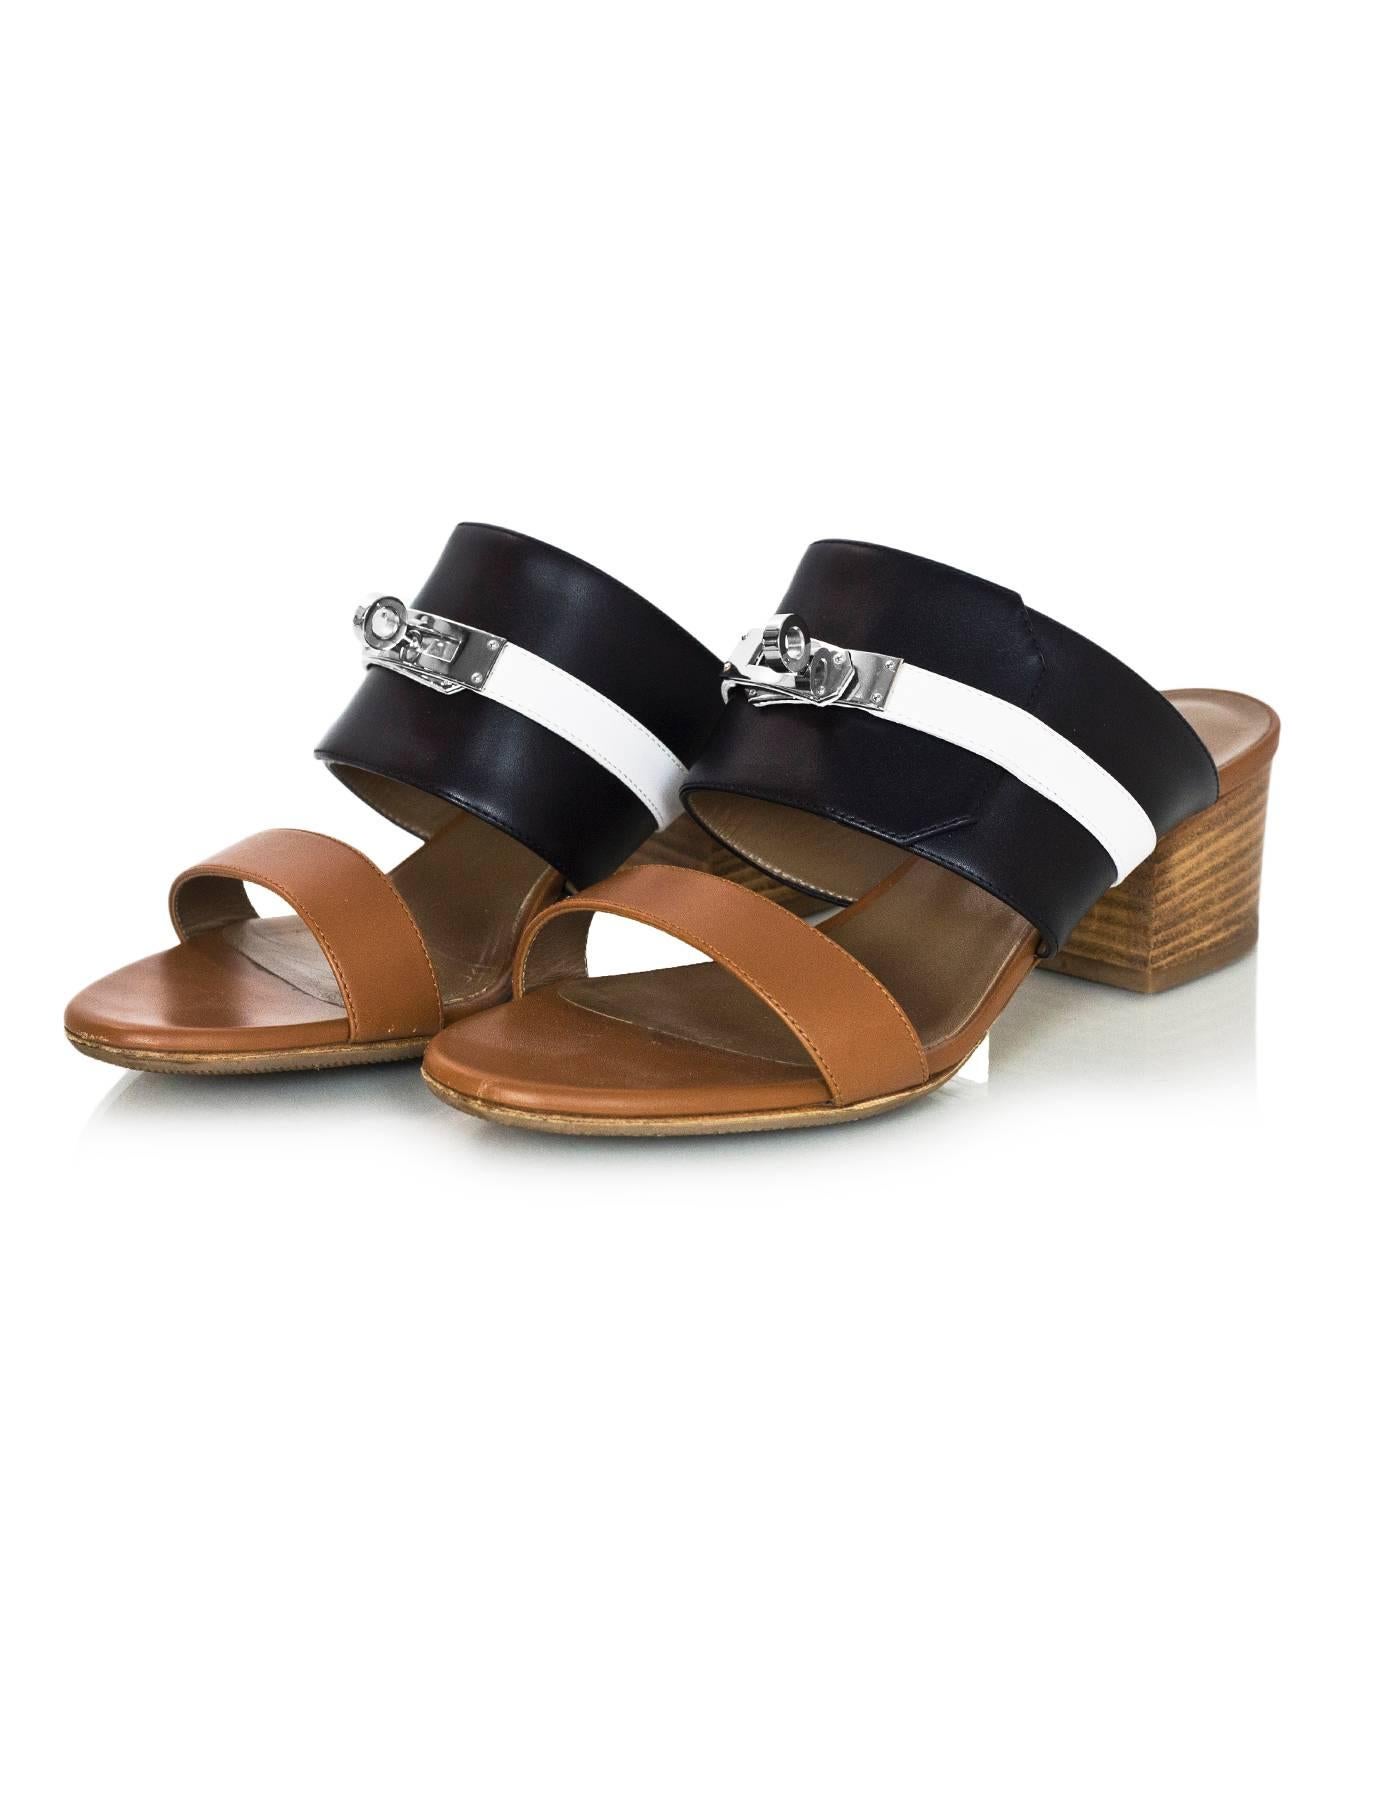 Hermes Tri-Color Palissandre Leather Ovation Kelly Lock Sandals Sz 36

Made In: Italy
Color: Tan, black, white
Materials: Calfskin leather
Closure/Opening: Slide on
Sole Stamp: Hermes 36 Semelle Cuir Made in Italy
Retail Price: $1,100 + tax
Overall